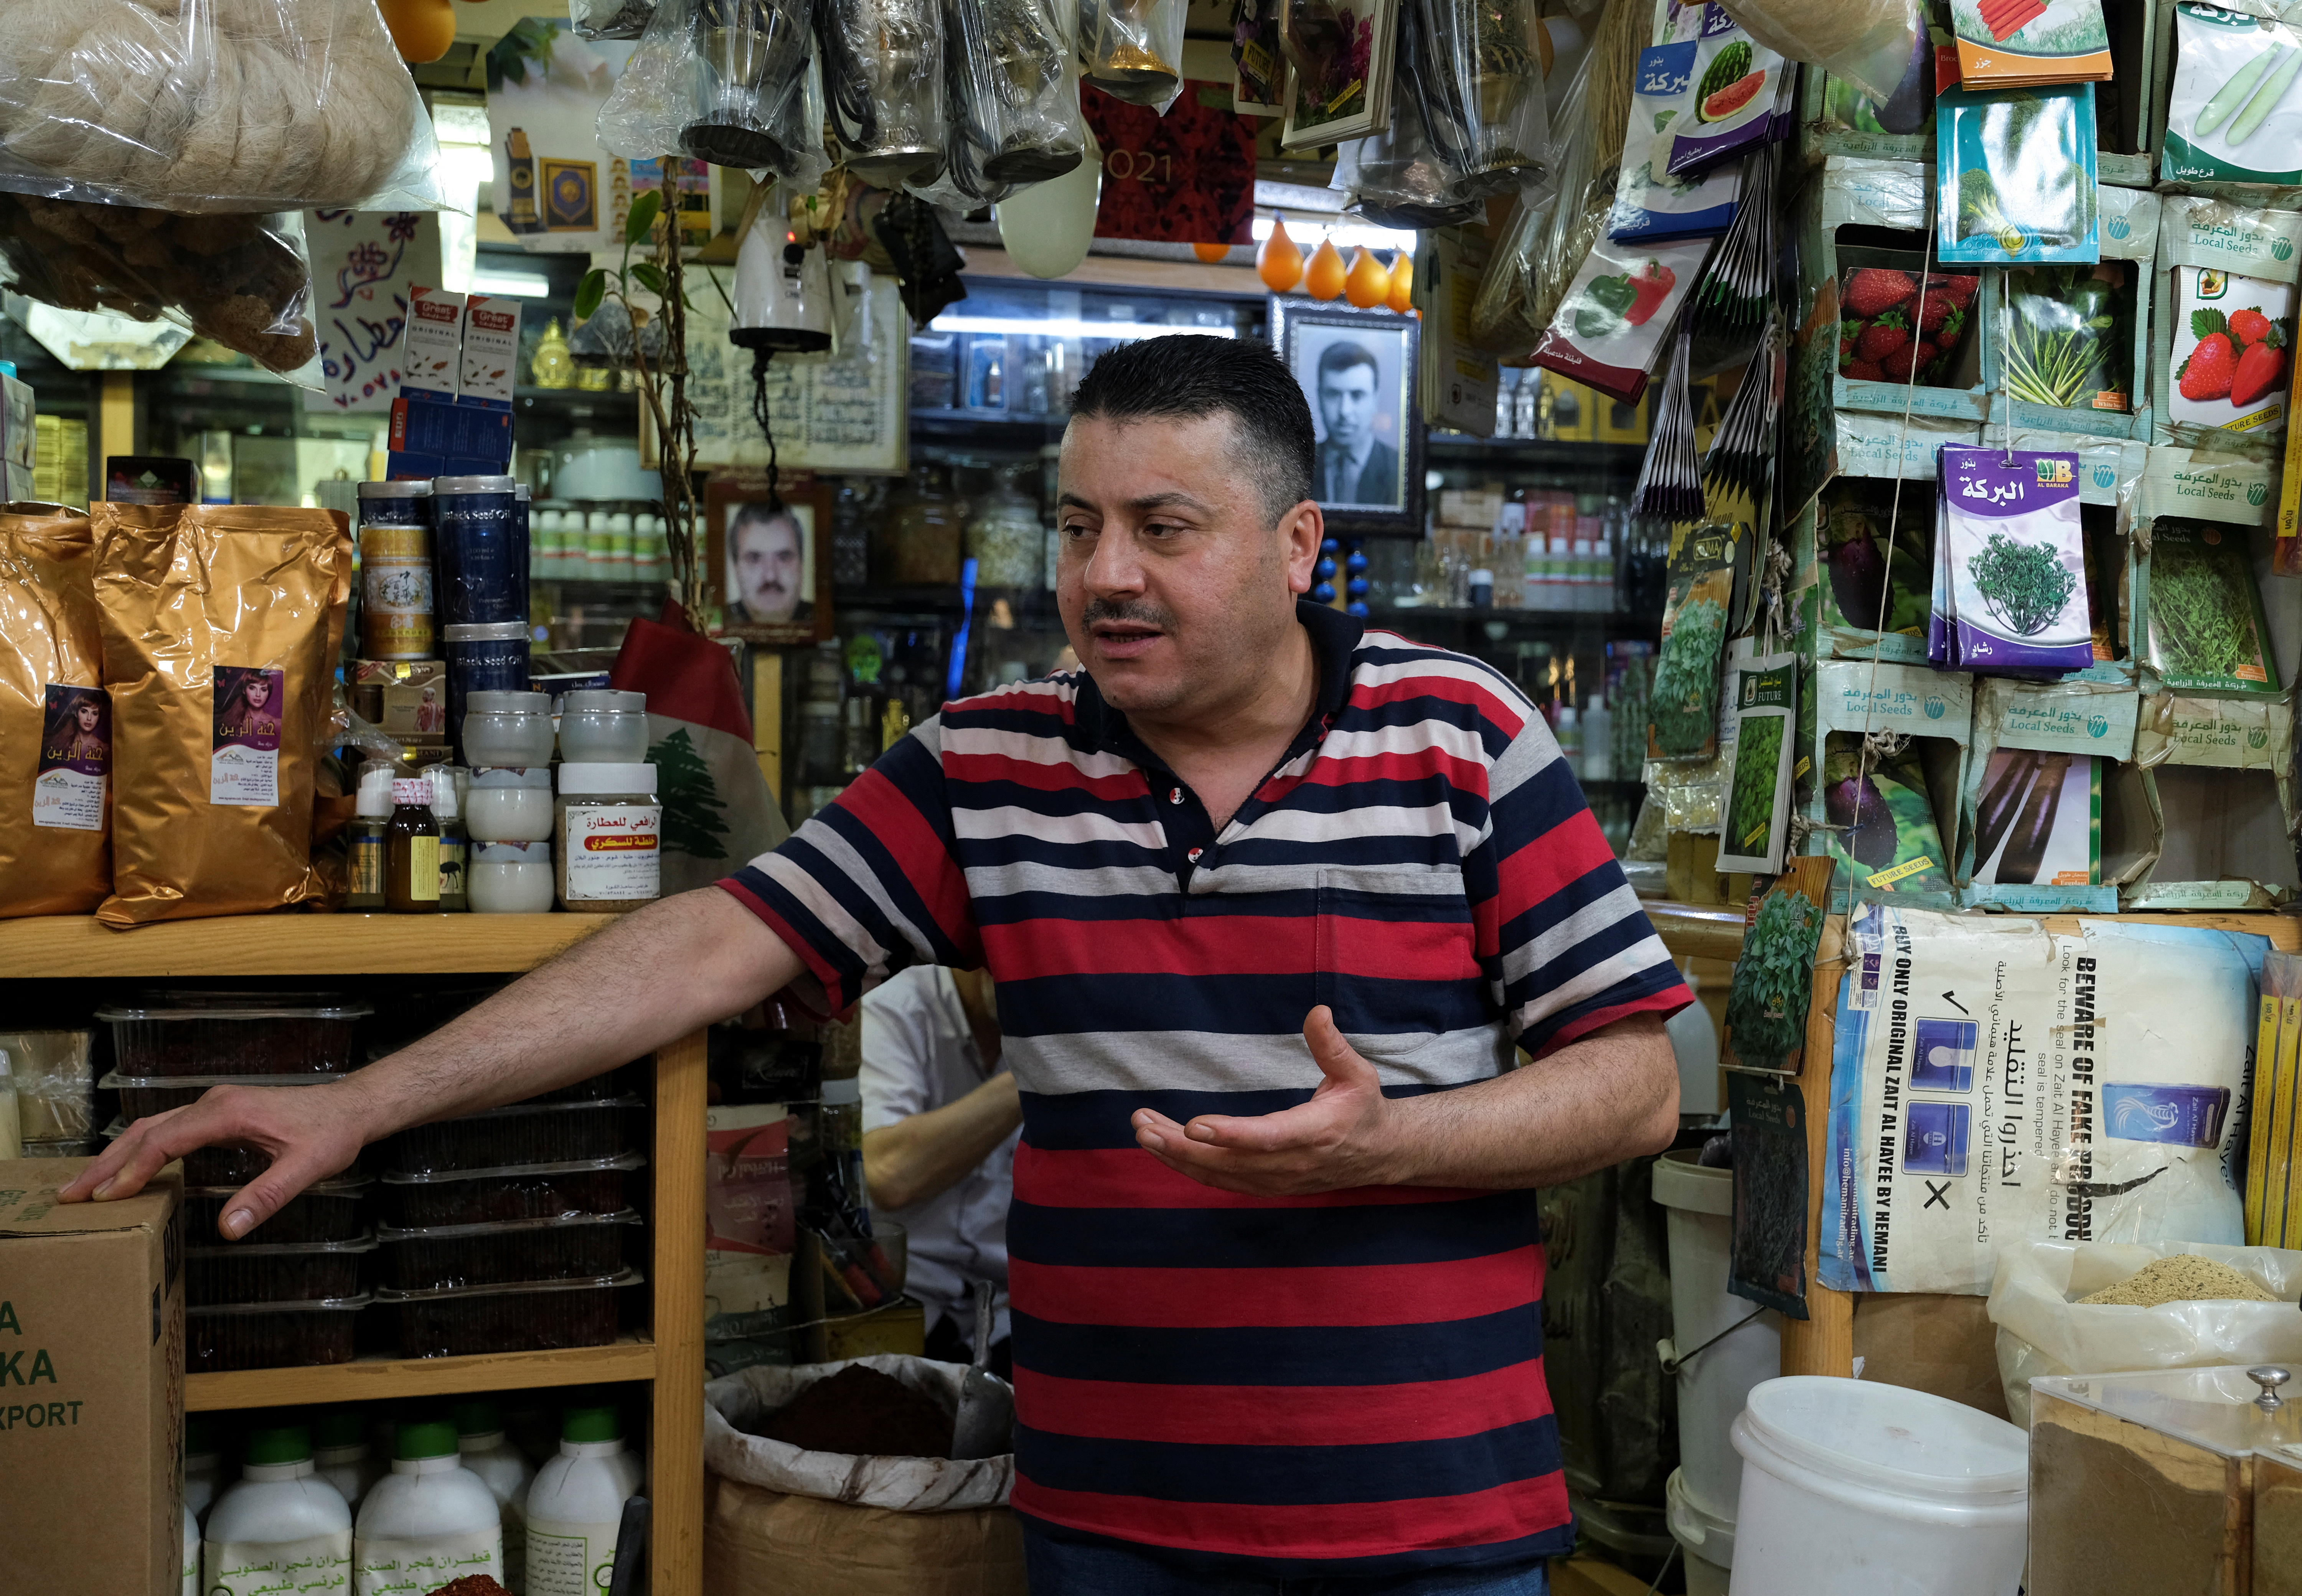 Apothecarist Omar al-Rafie, 48, speaks during an interview with Reuters at his shop in Tripoli